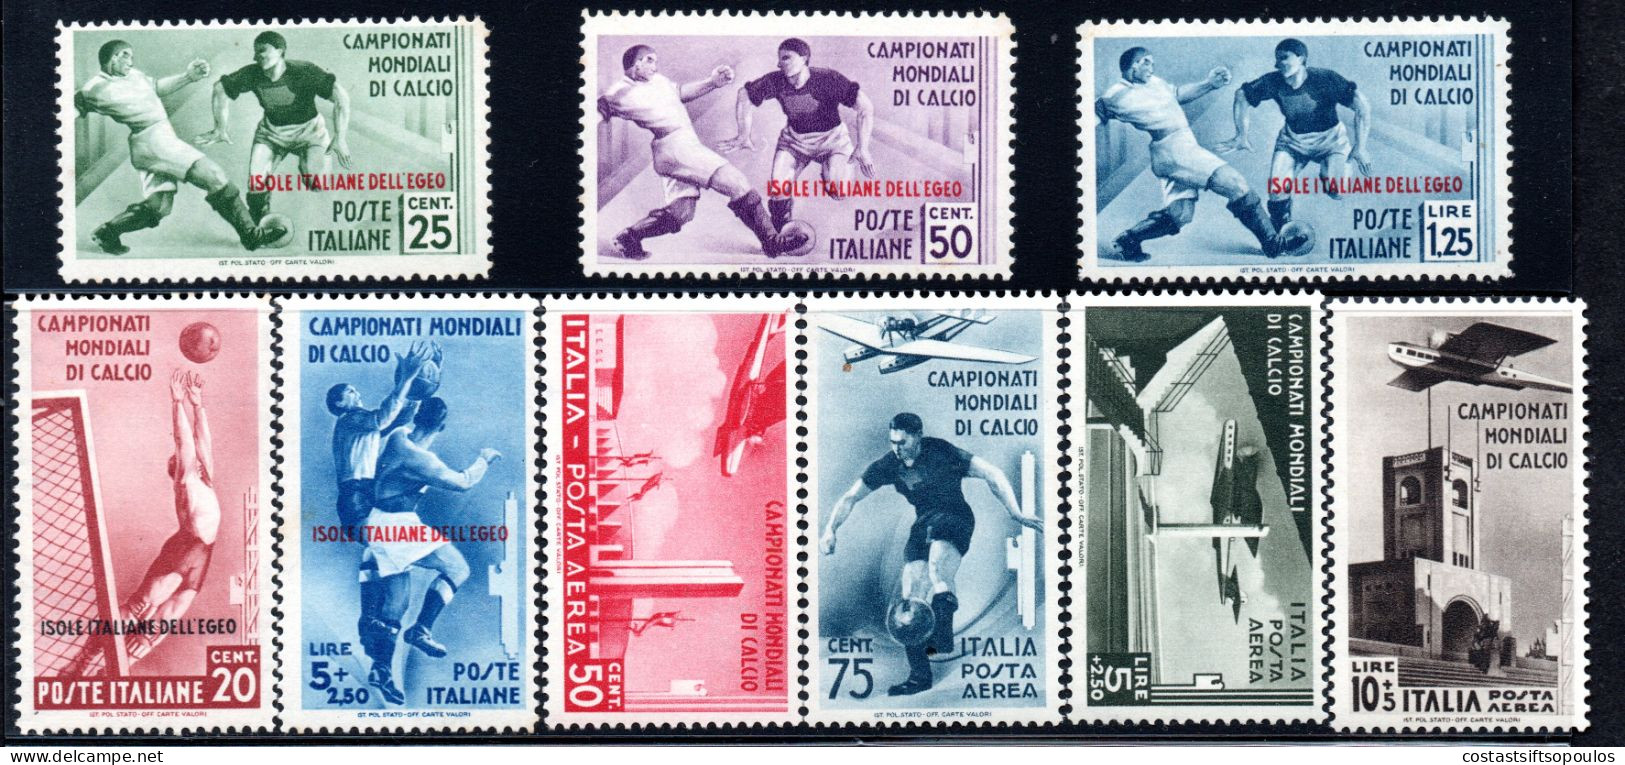 2786. -5.GREECE,ITALY,DODECANESE,1934 SOCCER,FOOTBALL,SC.31-35, C28-C31MNH.LIGHT GUM BLEMISHES, SEE SCAN. - Dodekanesos